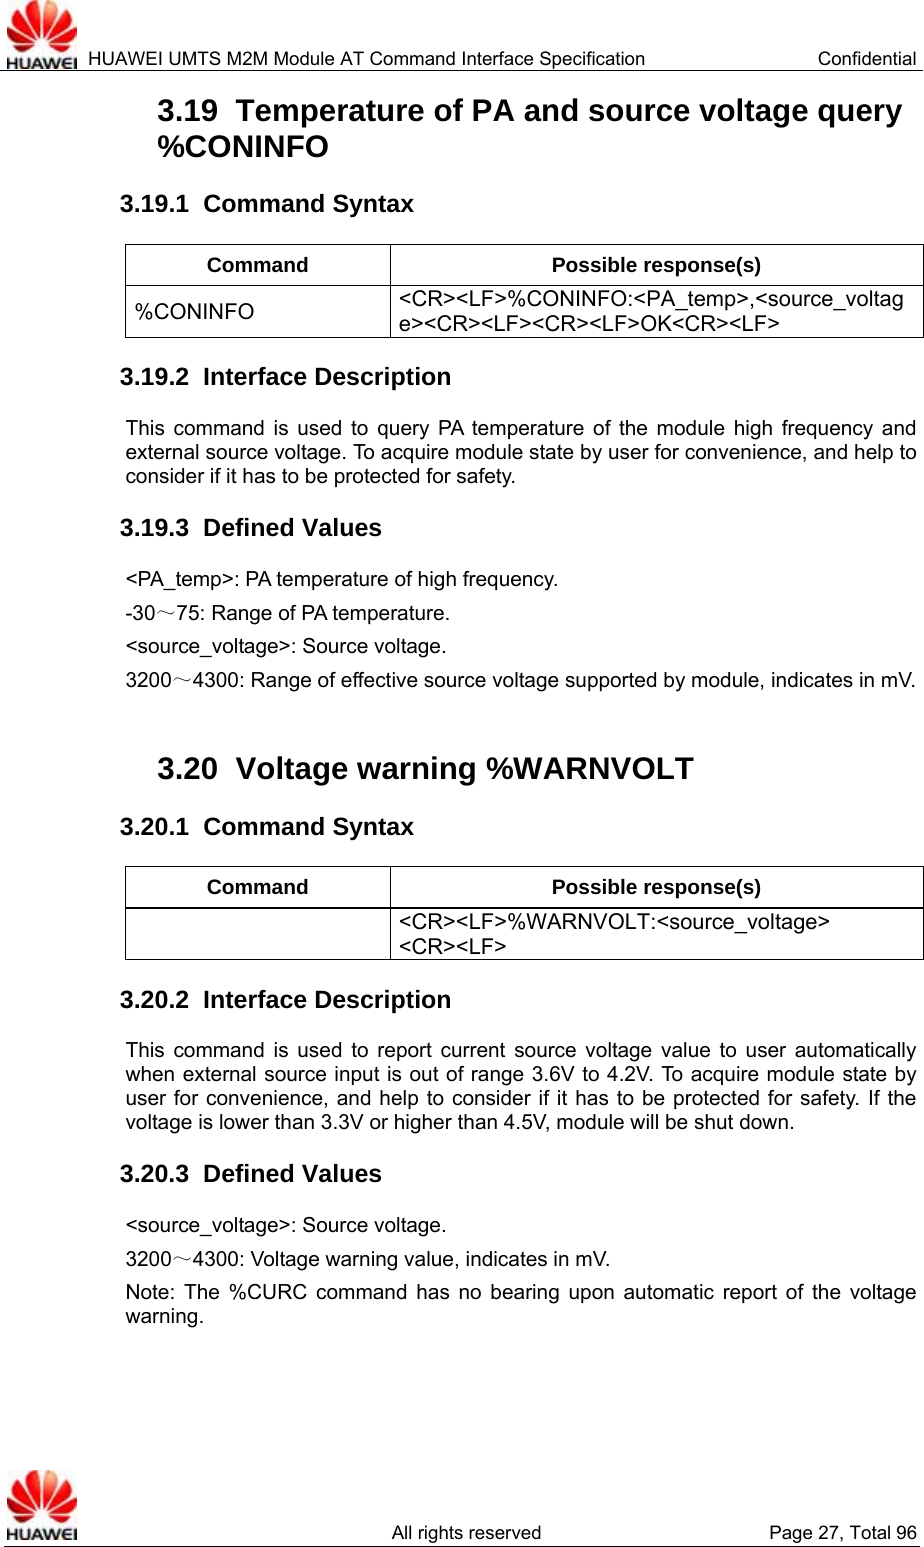  HUAWEI UMTS M2M Module AT Command Interface Specification  Confidential   All rights reserved  Page 27, Total 96 3.19  Temperature of PA and source voltage query %CONINFO  3.19.1  Command Syntax Command Possible response(s) %CONINFO  &lt;CR&gt;&lt;LF&gt;%CONINFO:&lt;PA_temp&gt;,&lt;source_voltage&gt;&lt;CR&gt;&lt;LF&gt;&lt;CR&gt;&lt;LF&gt;OK&lt;CR&gt;&lt;LF&gt; 3.19.2  Interface Description This command is used to query PA temperature of the module high frequency and external source voltage. To acquire module state by user for convenience, and help to consider if it has to be protected for safety. 3.19.3  Defined Values &lt;PA_temp&gt;: PA temperature of high frequency.   -30～75: Range of PA temperature. &lt;source_voltage&gt;: Source voltage. 3200～4300: Range of effective source voltage supported by module, indicates in mV.  3.20  Voltage warning %WARNVOLT   3.20.1  Command Syntax Command Possible response(s)  &lt;CR&gt;&lt;LF&gt;%WARNVOLT:&lt;source_voltage&gt; &lt;CR&gt;&lt;LF&gt; 3.20.2  Interface Description This command is used to report current source voltage value to user automatically when external source input is out of range 3.6V to 4.2V. To acquire module state by user for convenience, and help to consider if it has to be protected for safety. If the voltage is lower than 3.3V or higher than 4.5V, module will be shut down. 3.20.3  Defined Values &lt;source_voltage&gt;: Source voltage. 3200～4300: Voltage warning value, indicates in mV. Note: The %CURC command has no bearing upon automatic report of the voltage warning.  